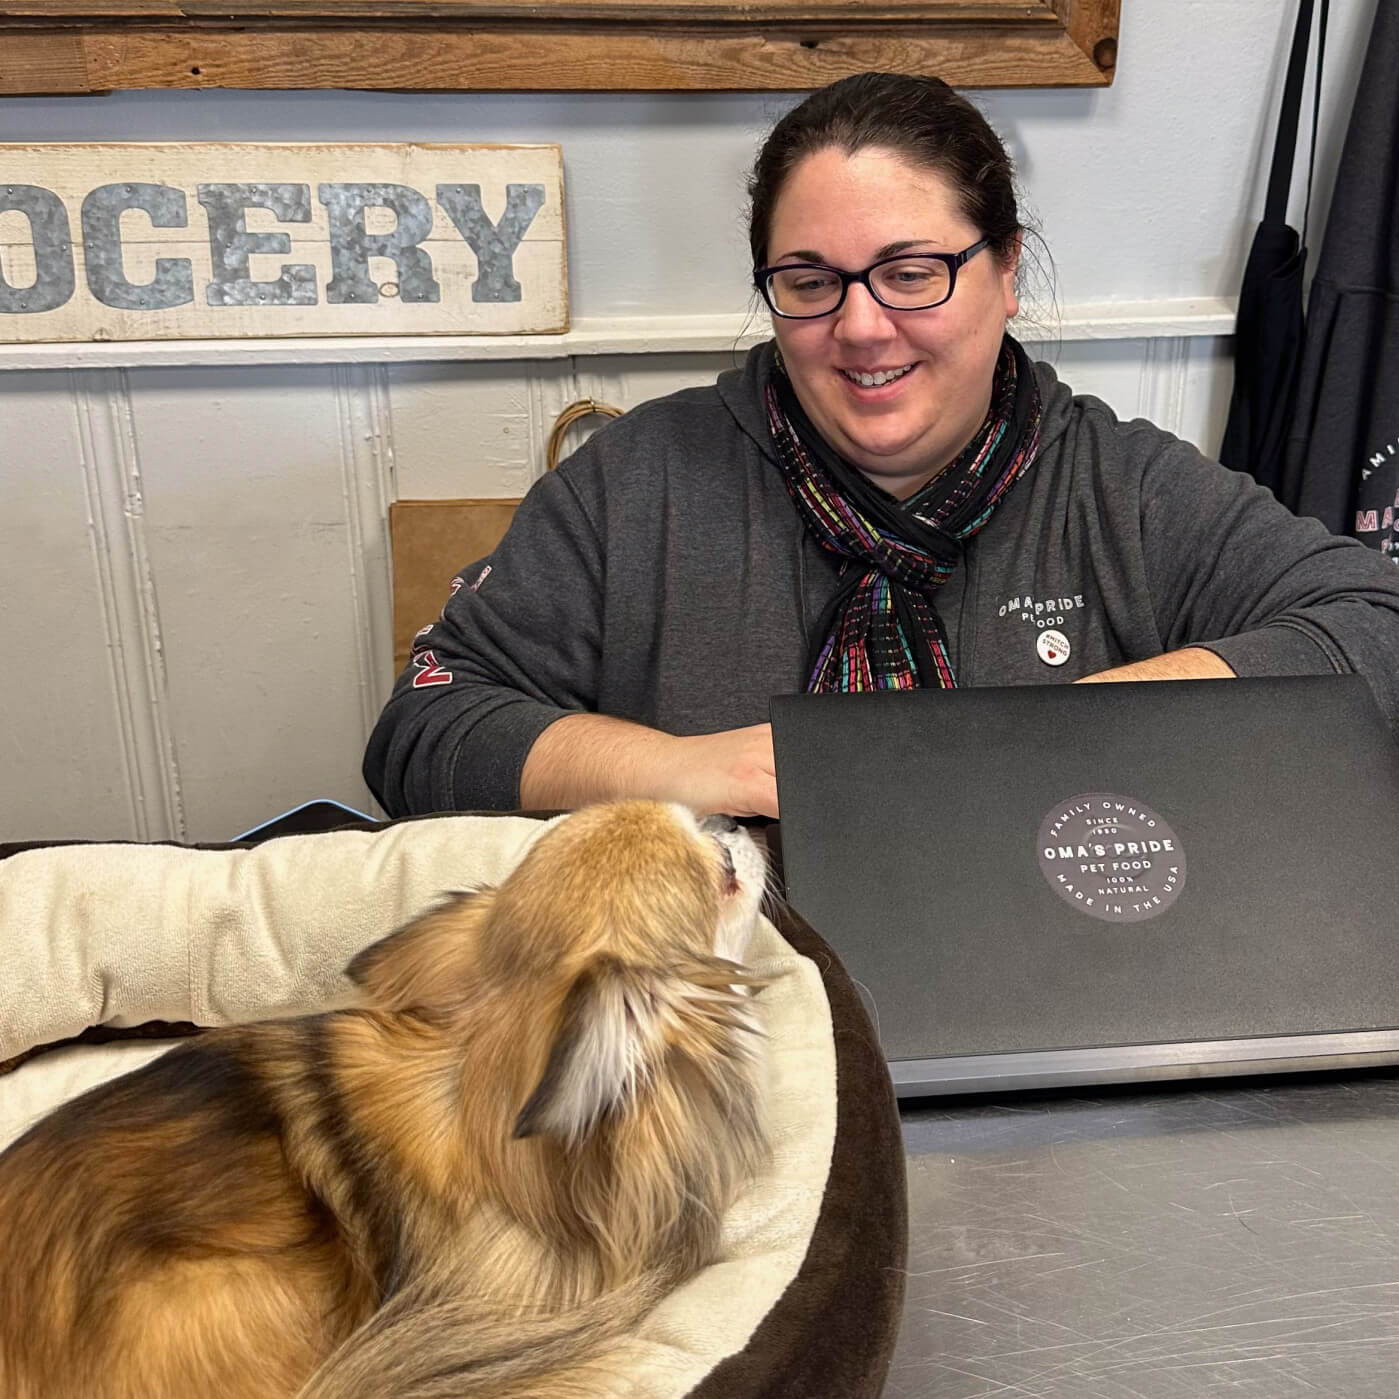 Meghan customer care specialist with her dog Mina.